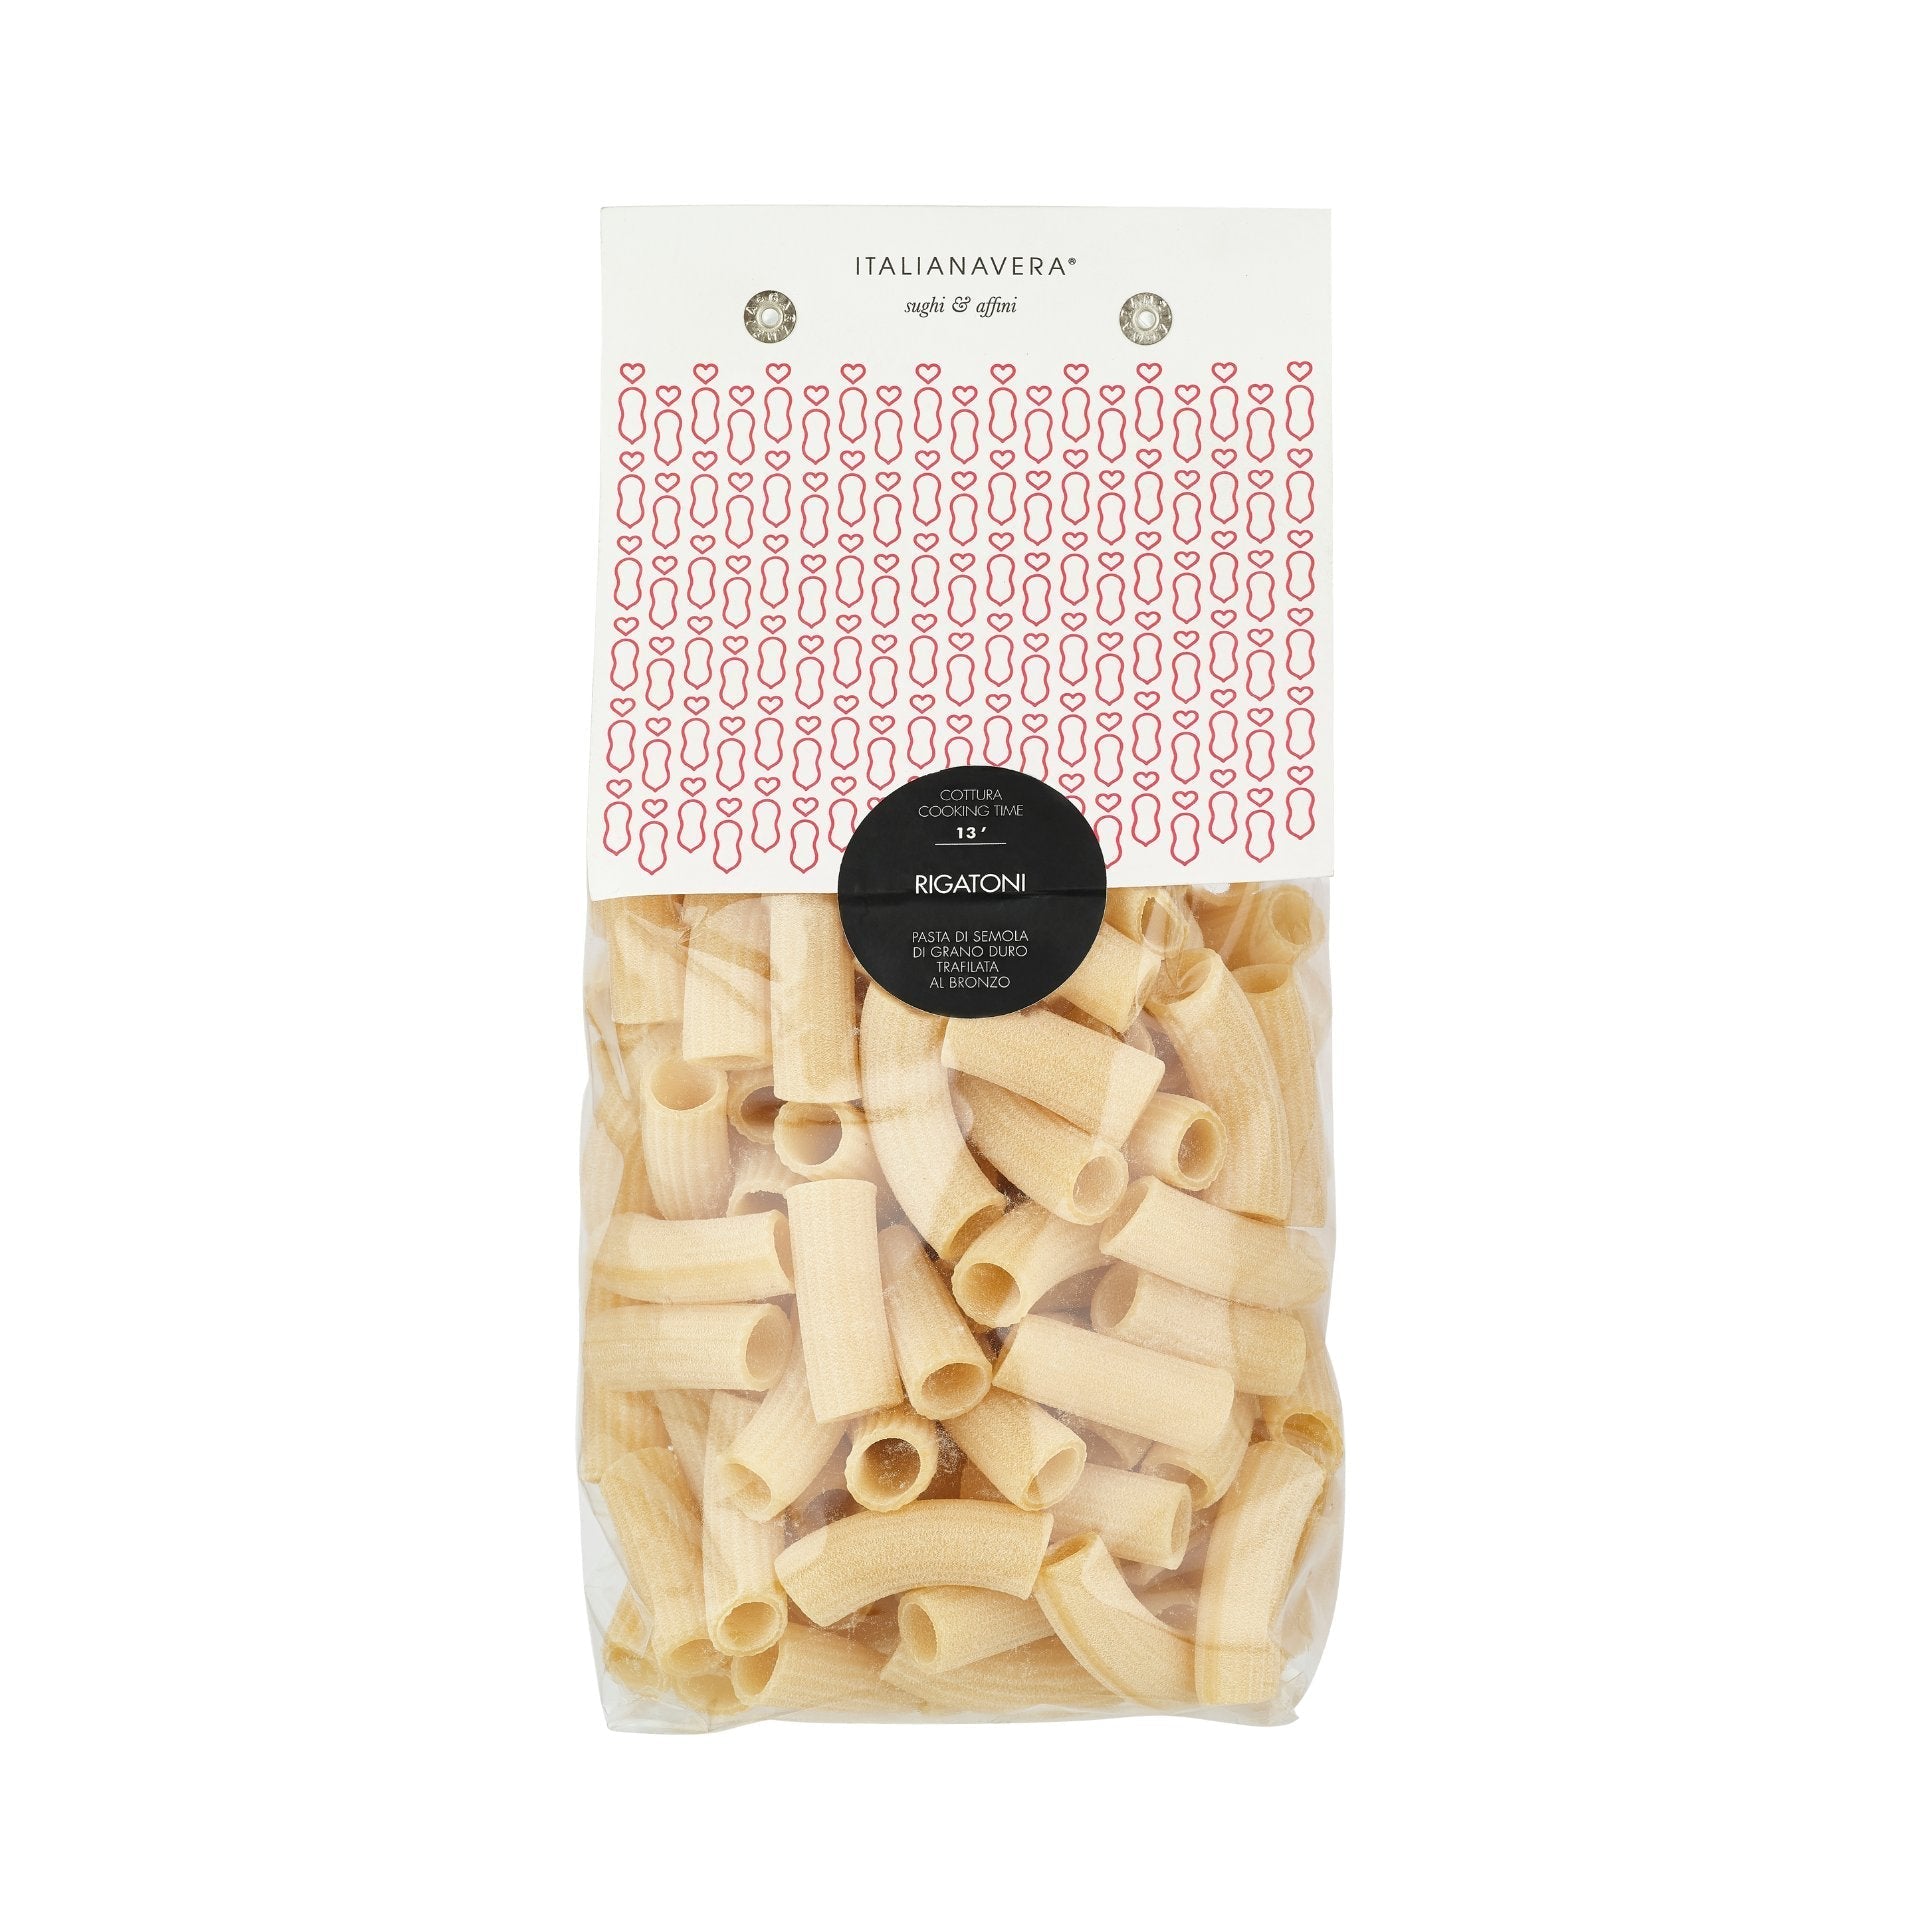 Italianavera Rigatoni Pasta 500g  | Imported and distributed in the UK by Just Gourmet Foods